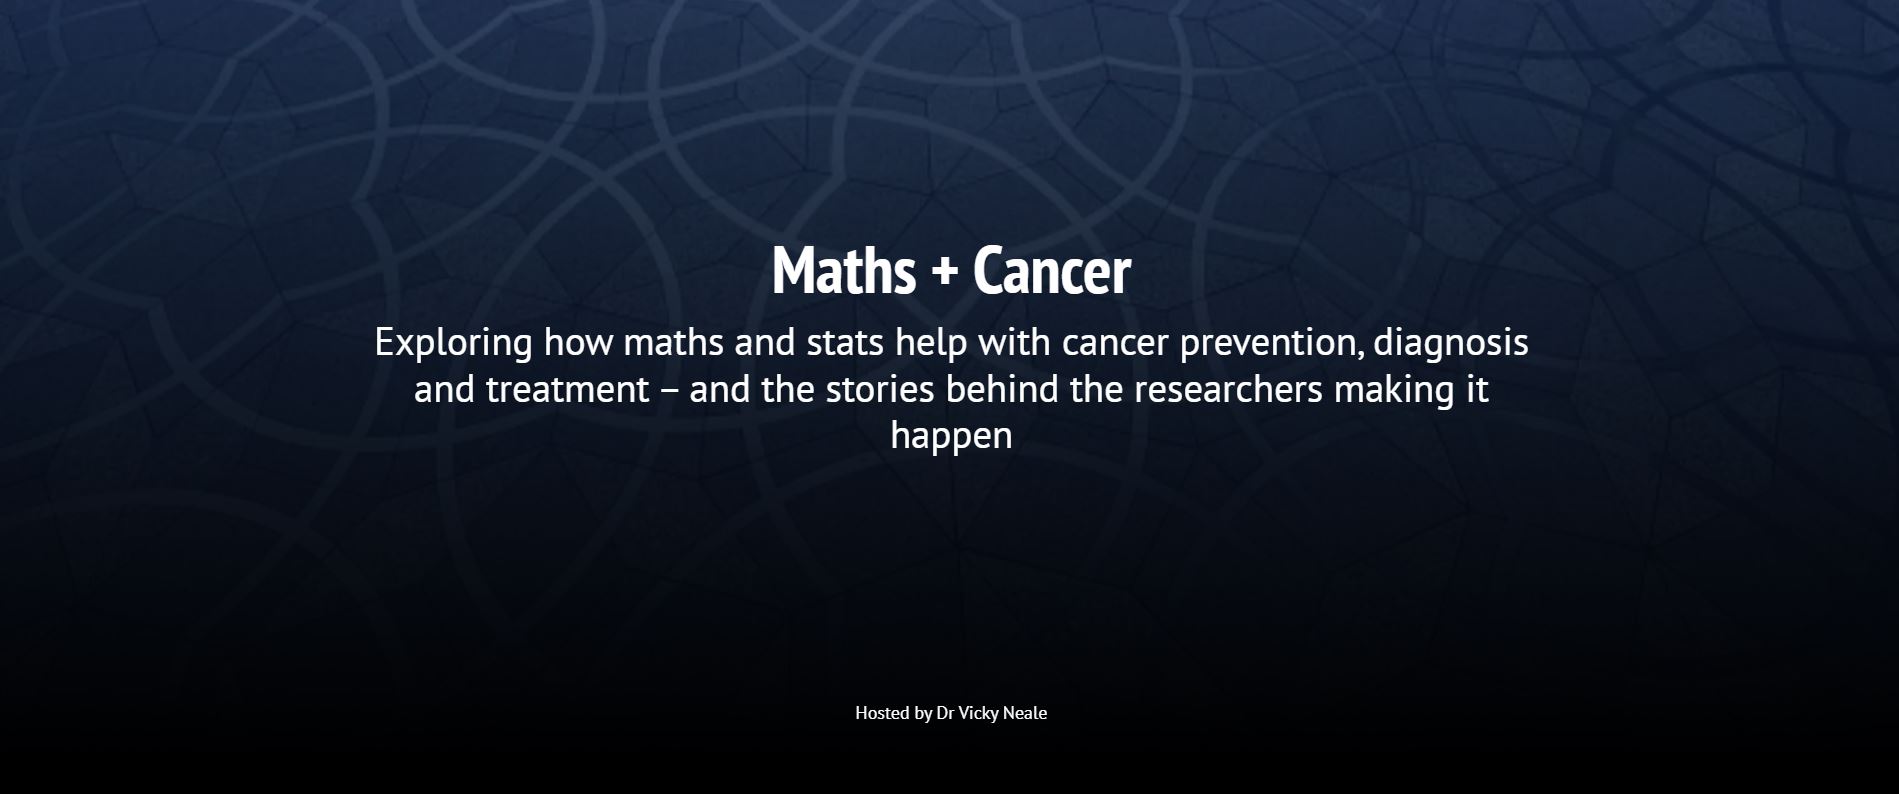 University of Oxford: "Maths + Cancer" Podcast